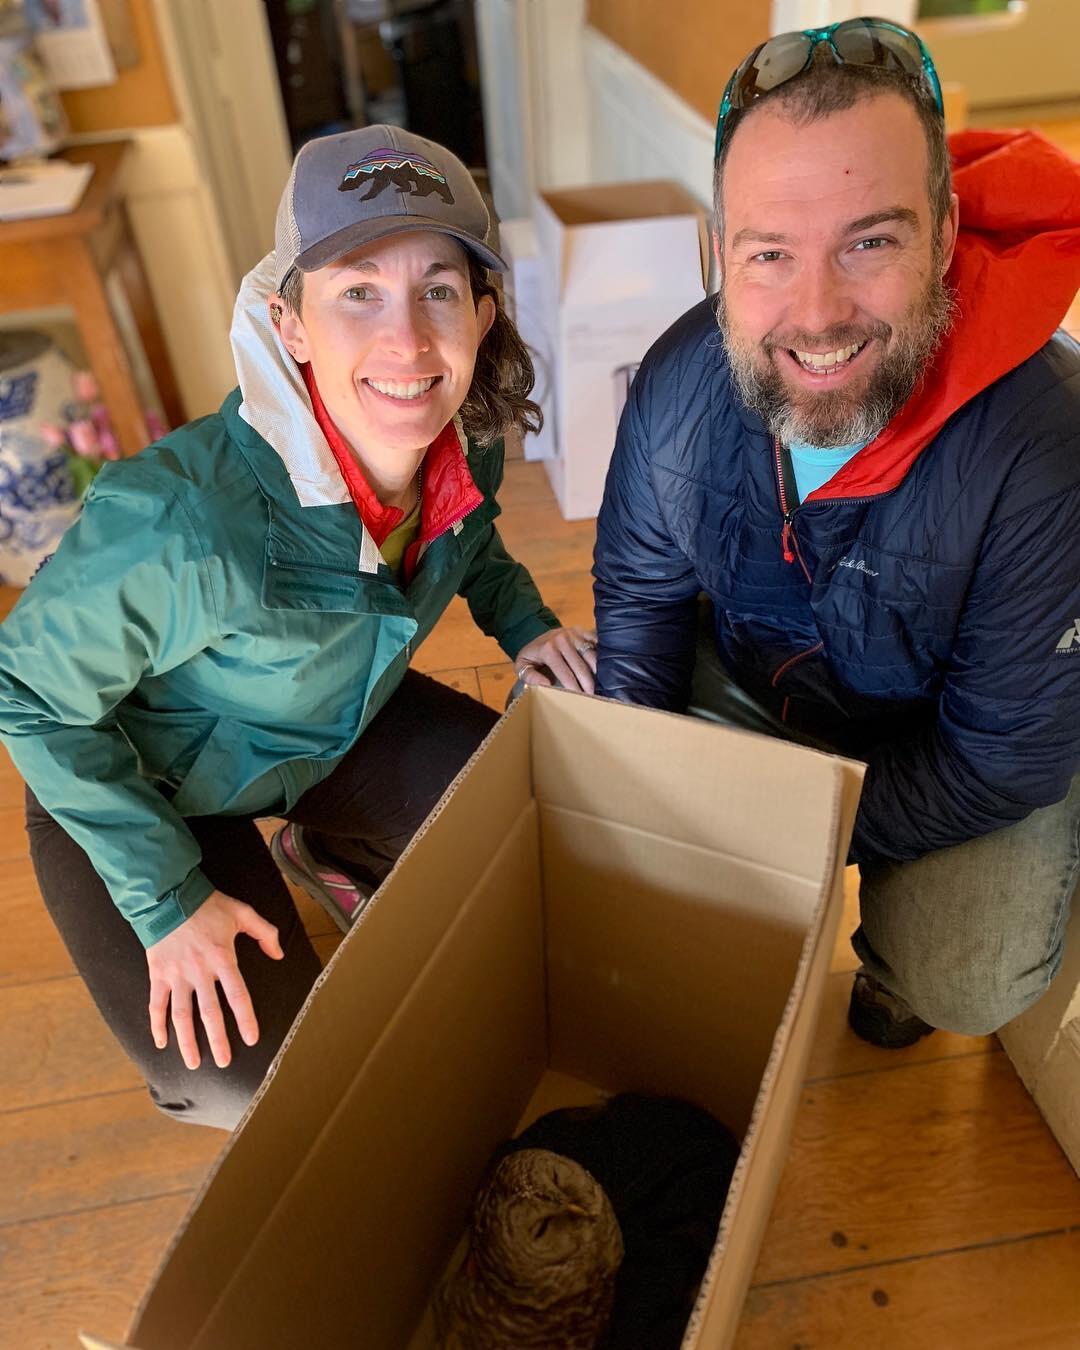 Two people crouch around a cardboard box that contains a disoriented looking Barred Owl. The people are smiling and looking at the viewer.